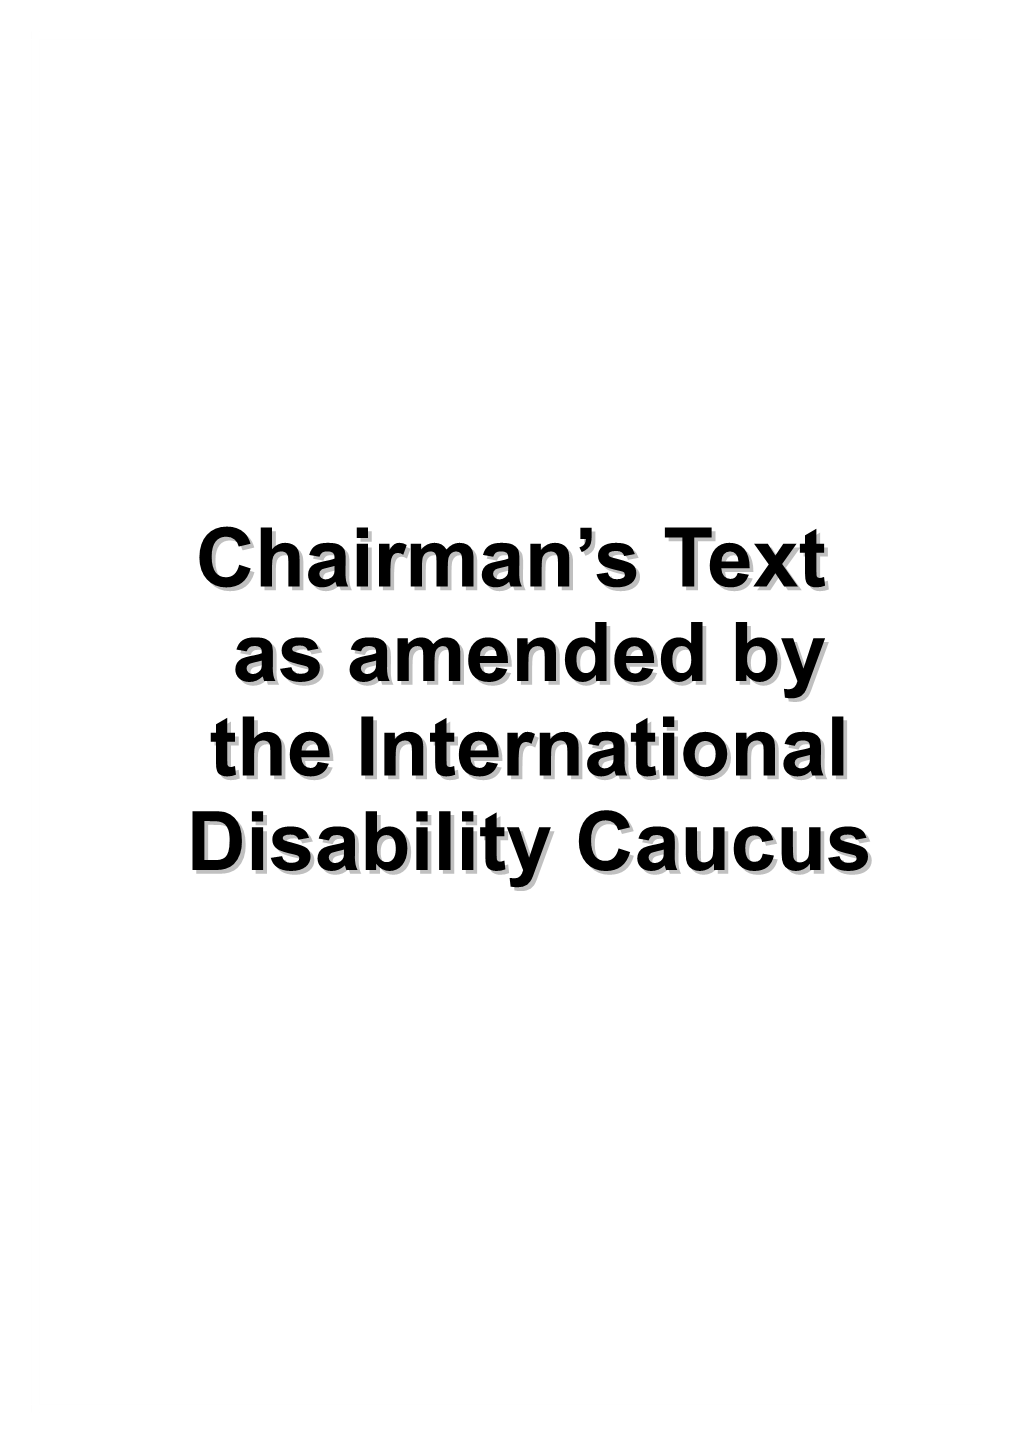 Chairman S Text (As Amended by the International Disability Caucus)